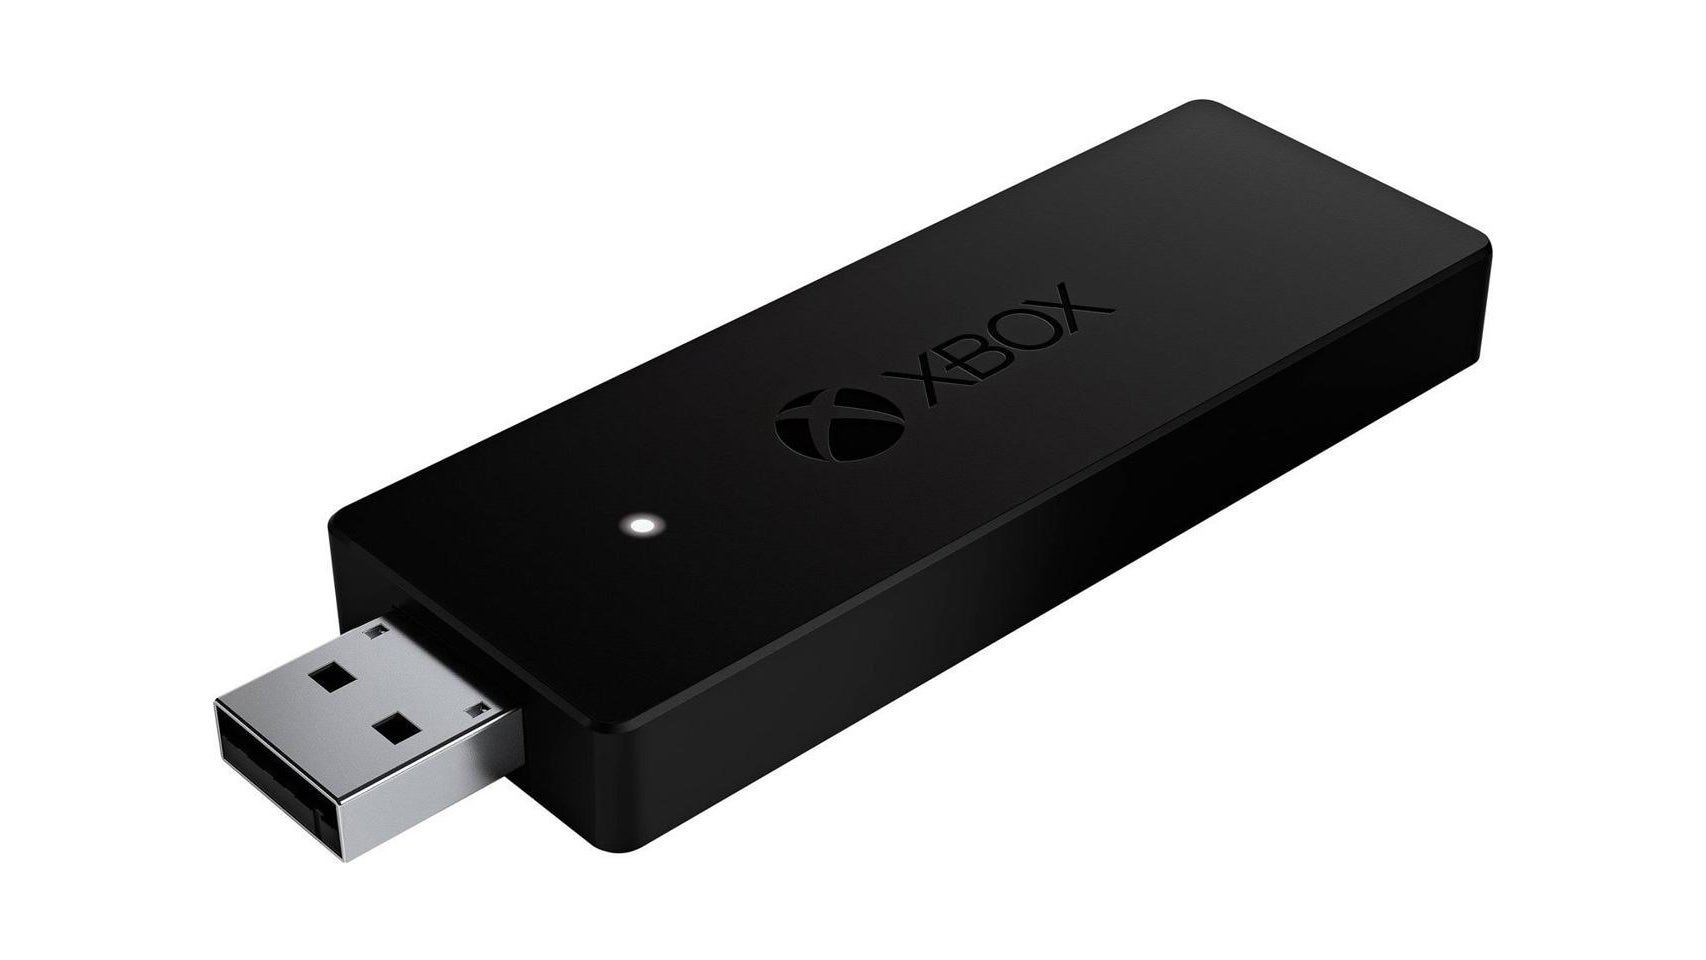 an xbox wireless adapter for windows, a kind of big usb dongle that adds xbox wireless